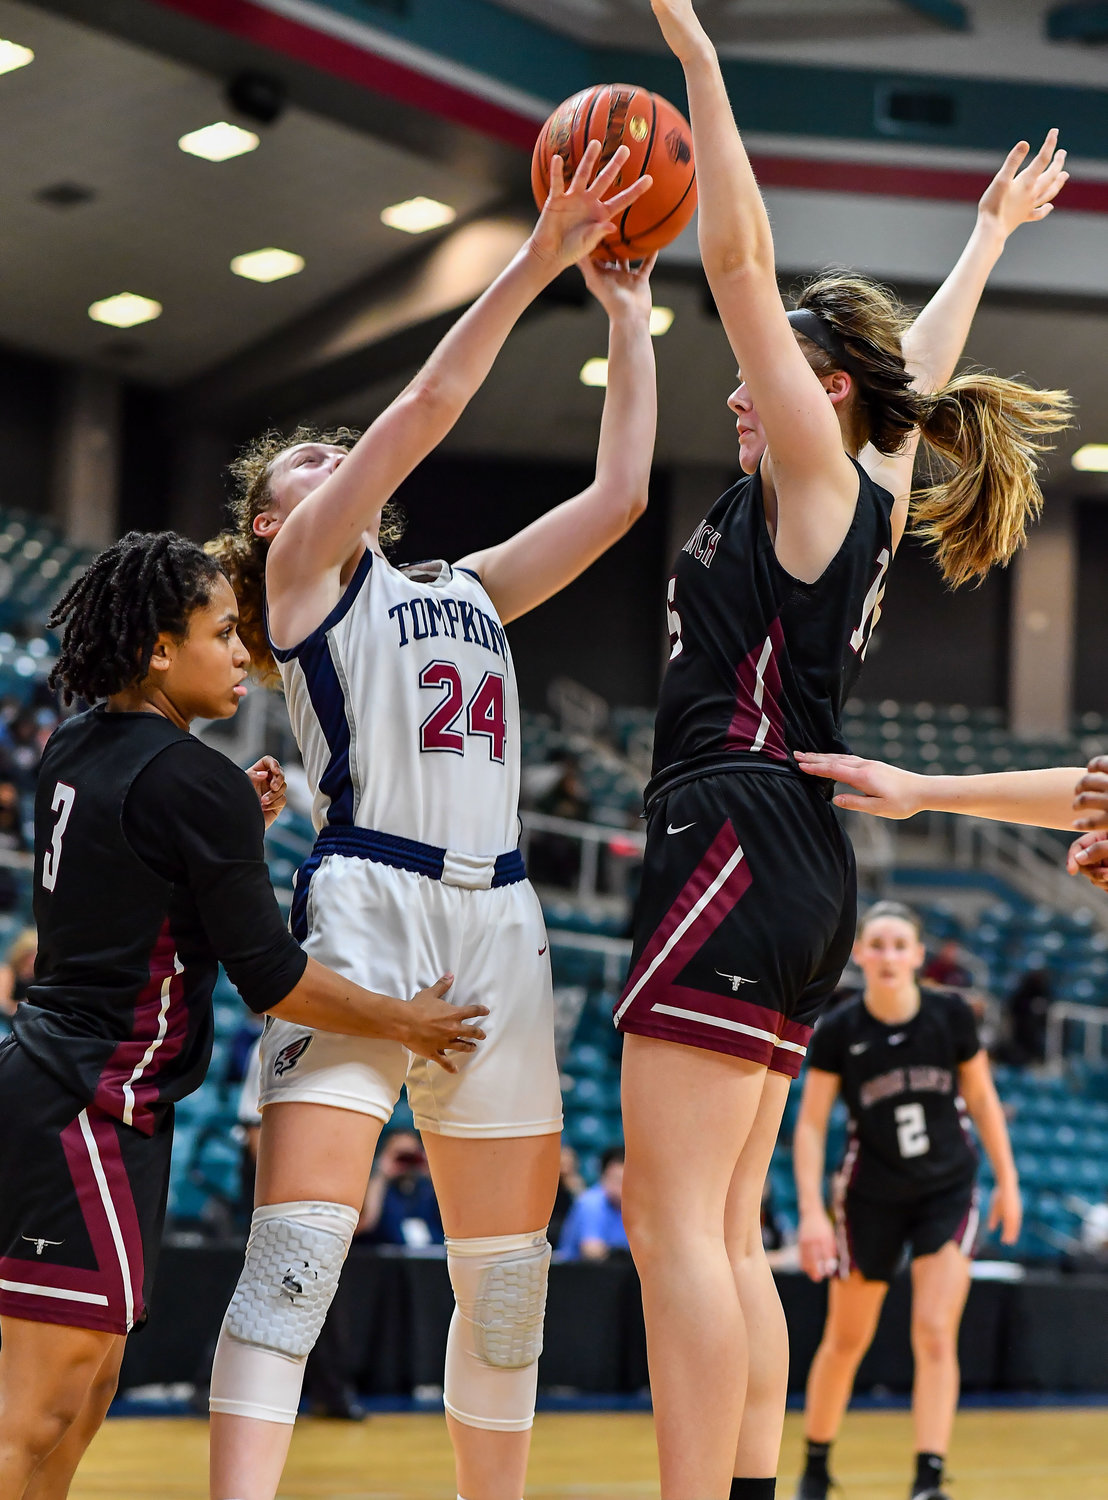 Katy Tx. Feb 15, 2022: Tompkins Gabby Panter #24 goes up for the shot during the Bi-District playoff, Tompkins vs George Ranch. (Photo by Mark Goodman / Katy Times)